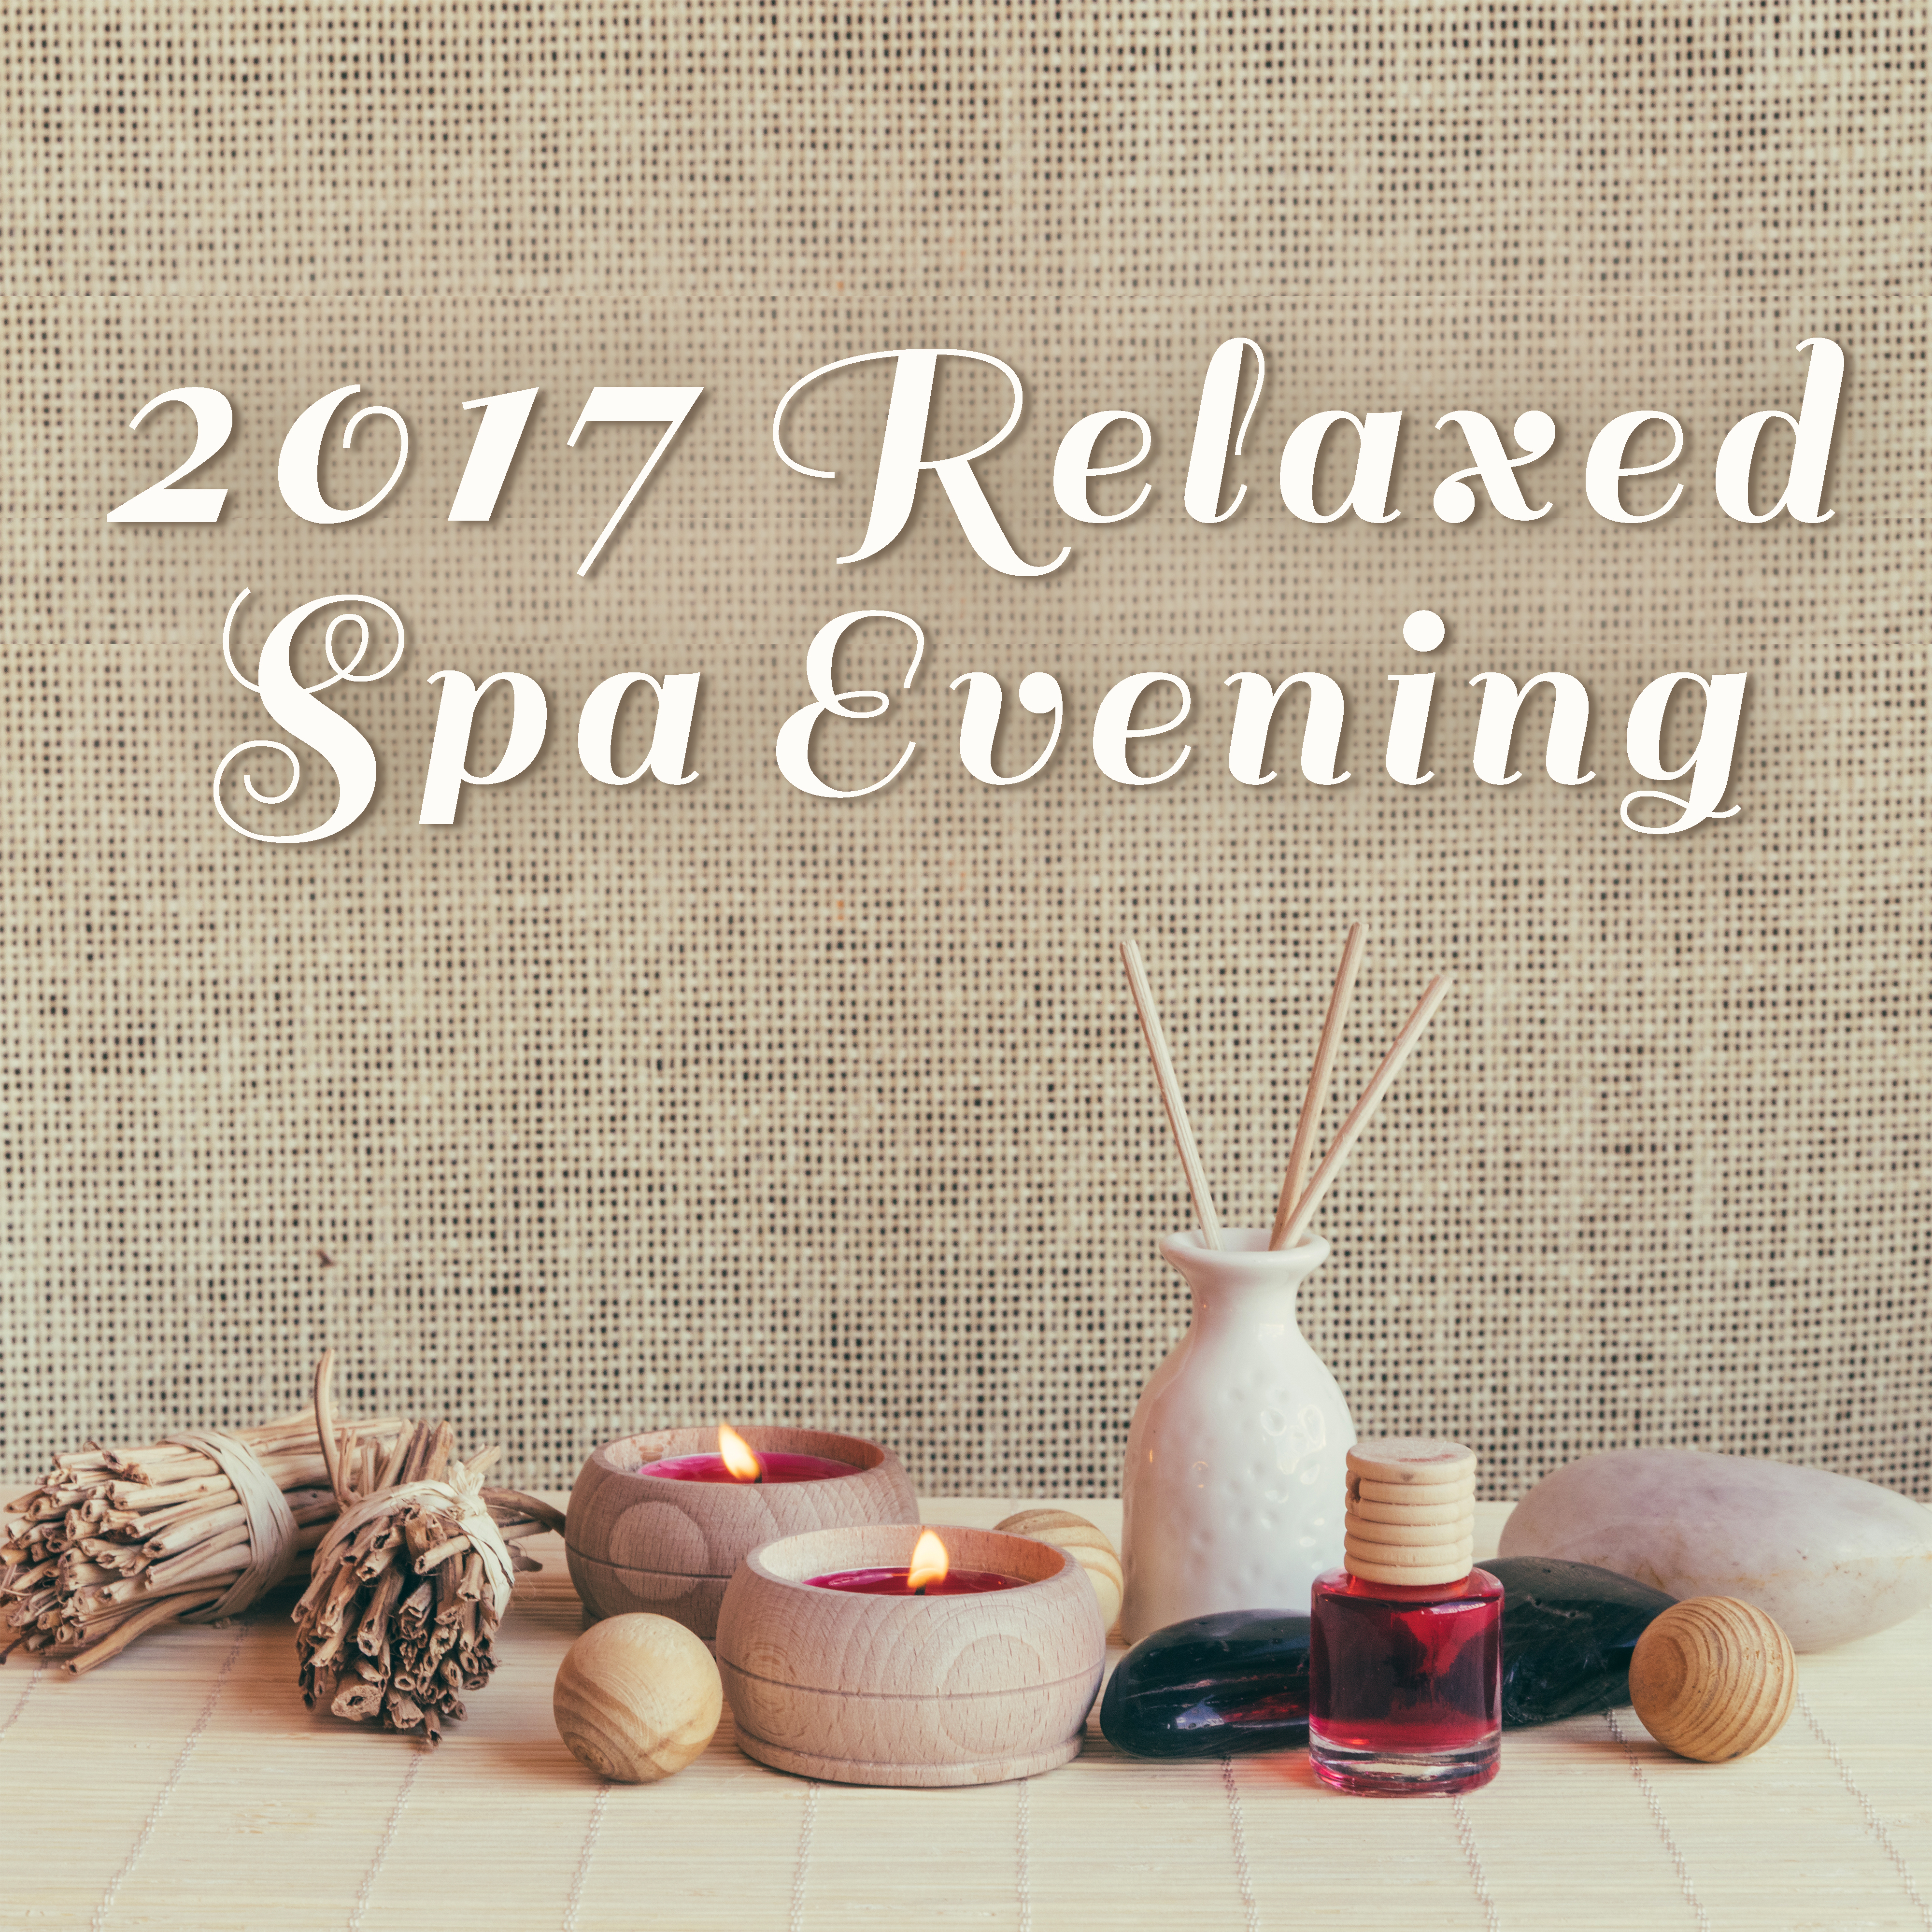 2017 Relaxed Spa Evening